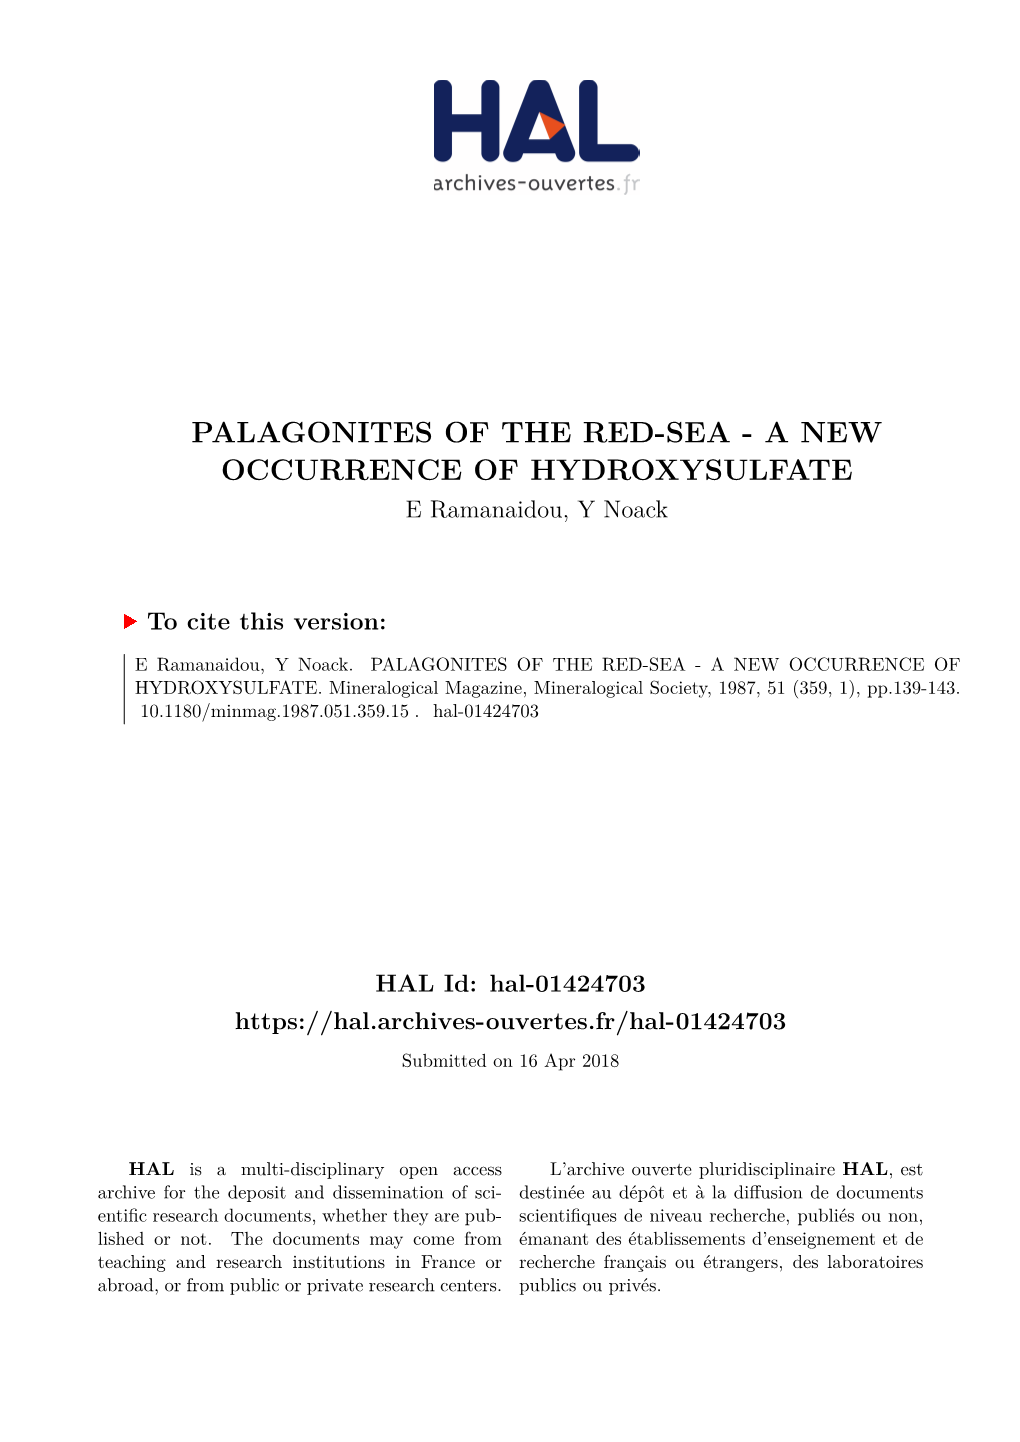 PALAGONITES of the RED-SEA - a NEW OCCURRENCE of HYDROXYSULFATE E Ramanaidou, Y Noack